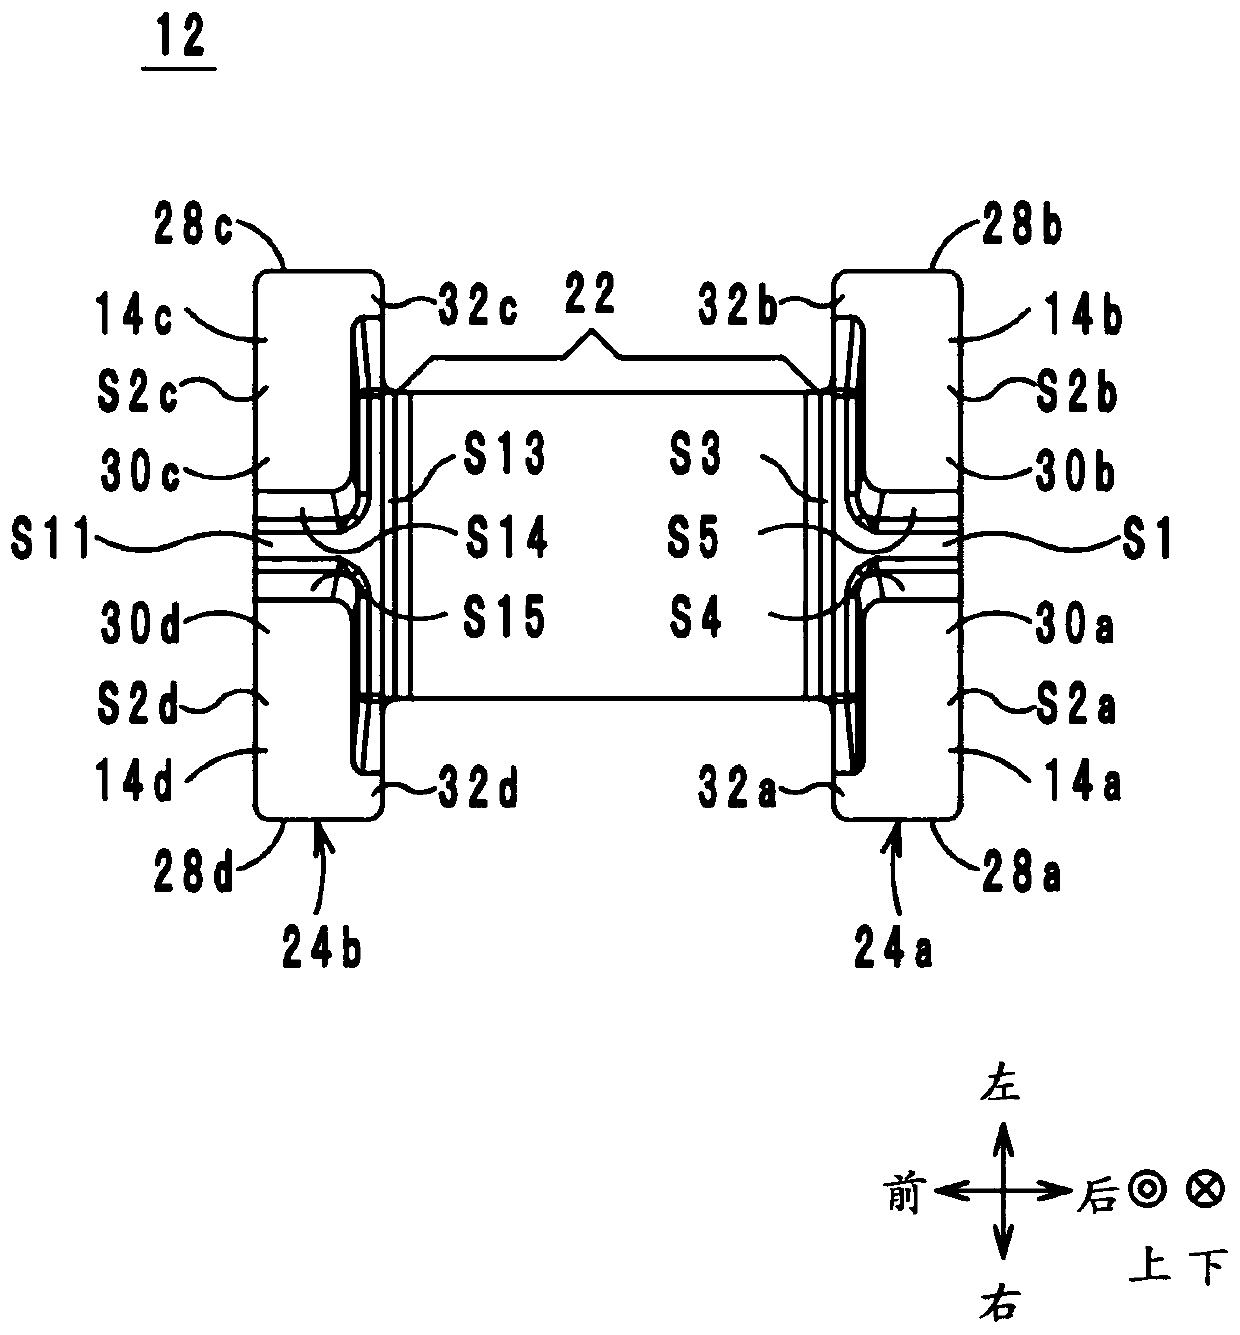 Electronic components and circuit modules